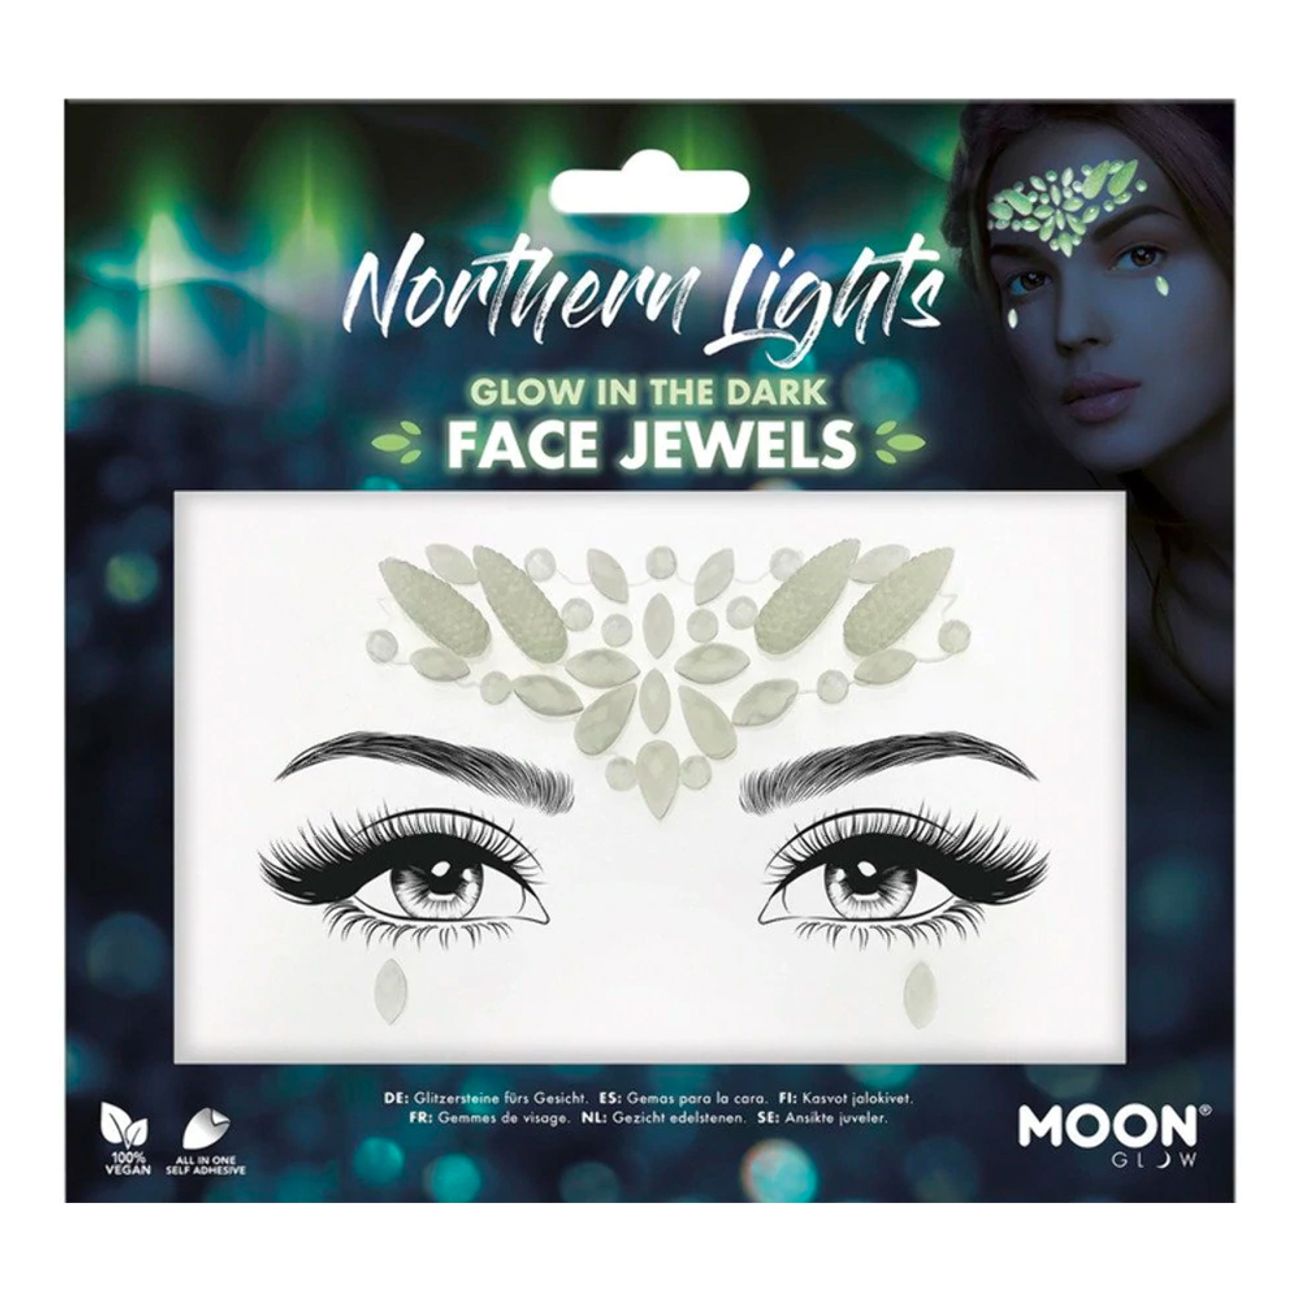 face-jewels-glow-in-the-dark-northern-lights-84453-1